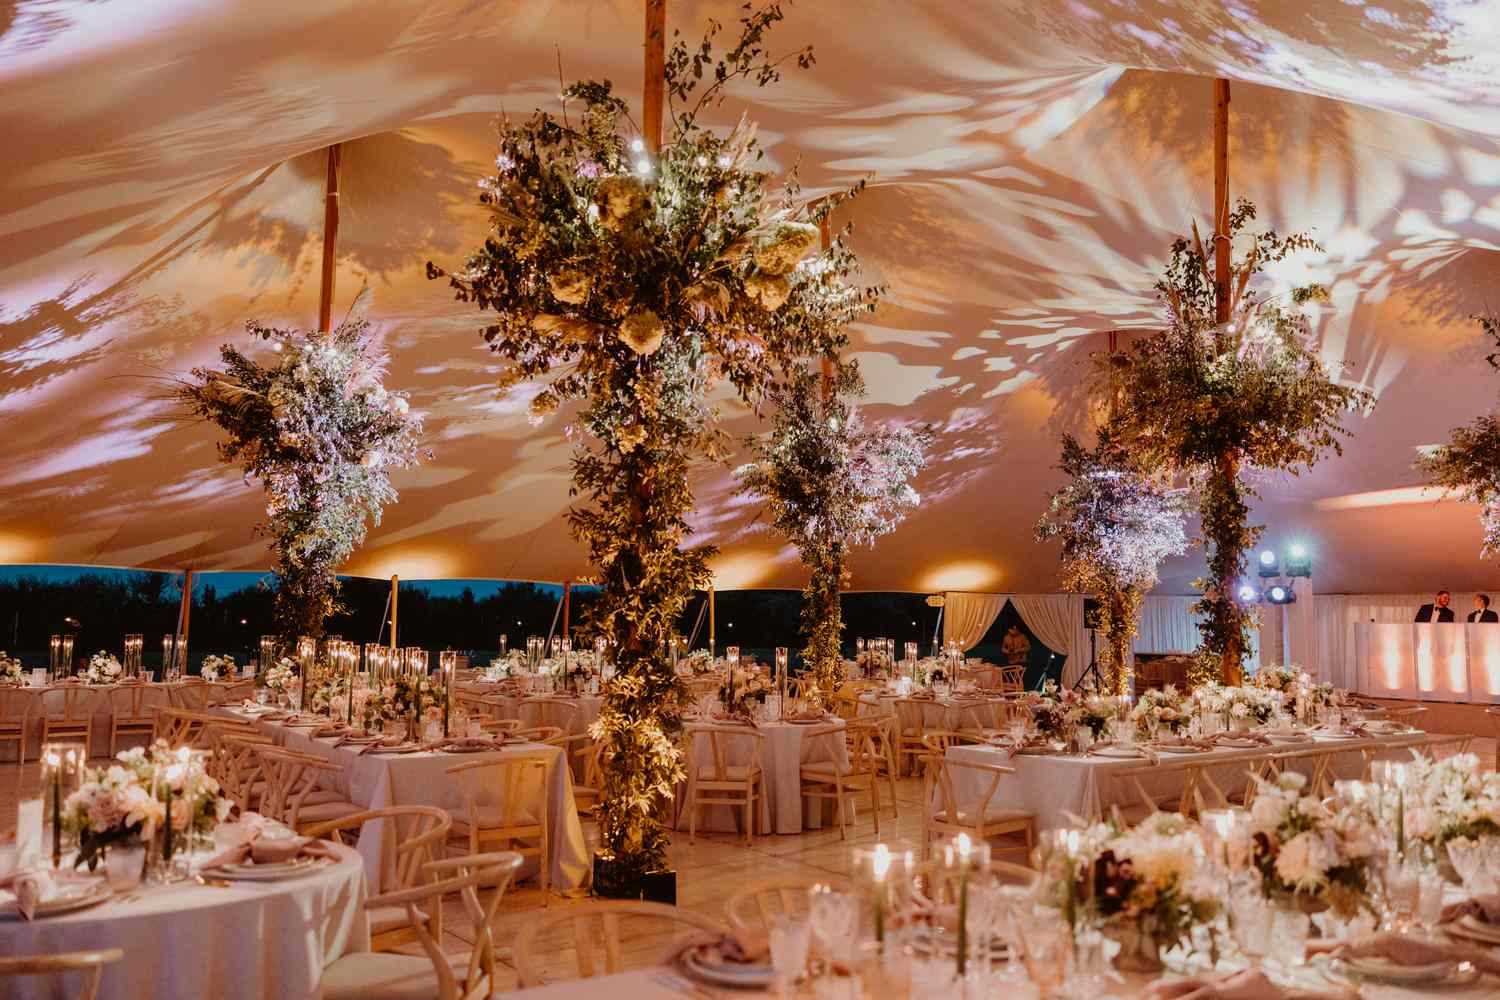 Say "I Do" Under the Perfect Wedding Tent from TheGazeboStore.com